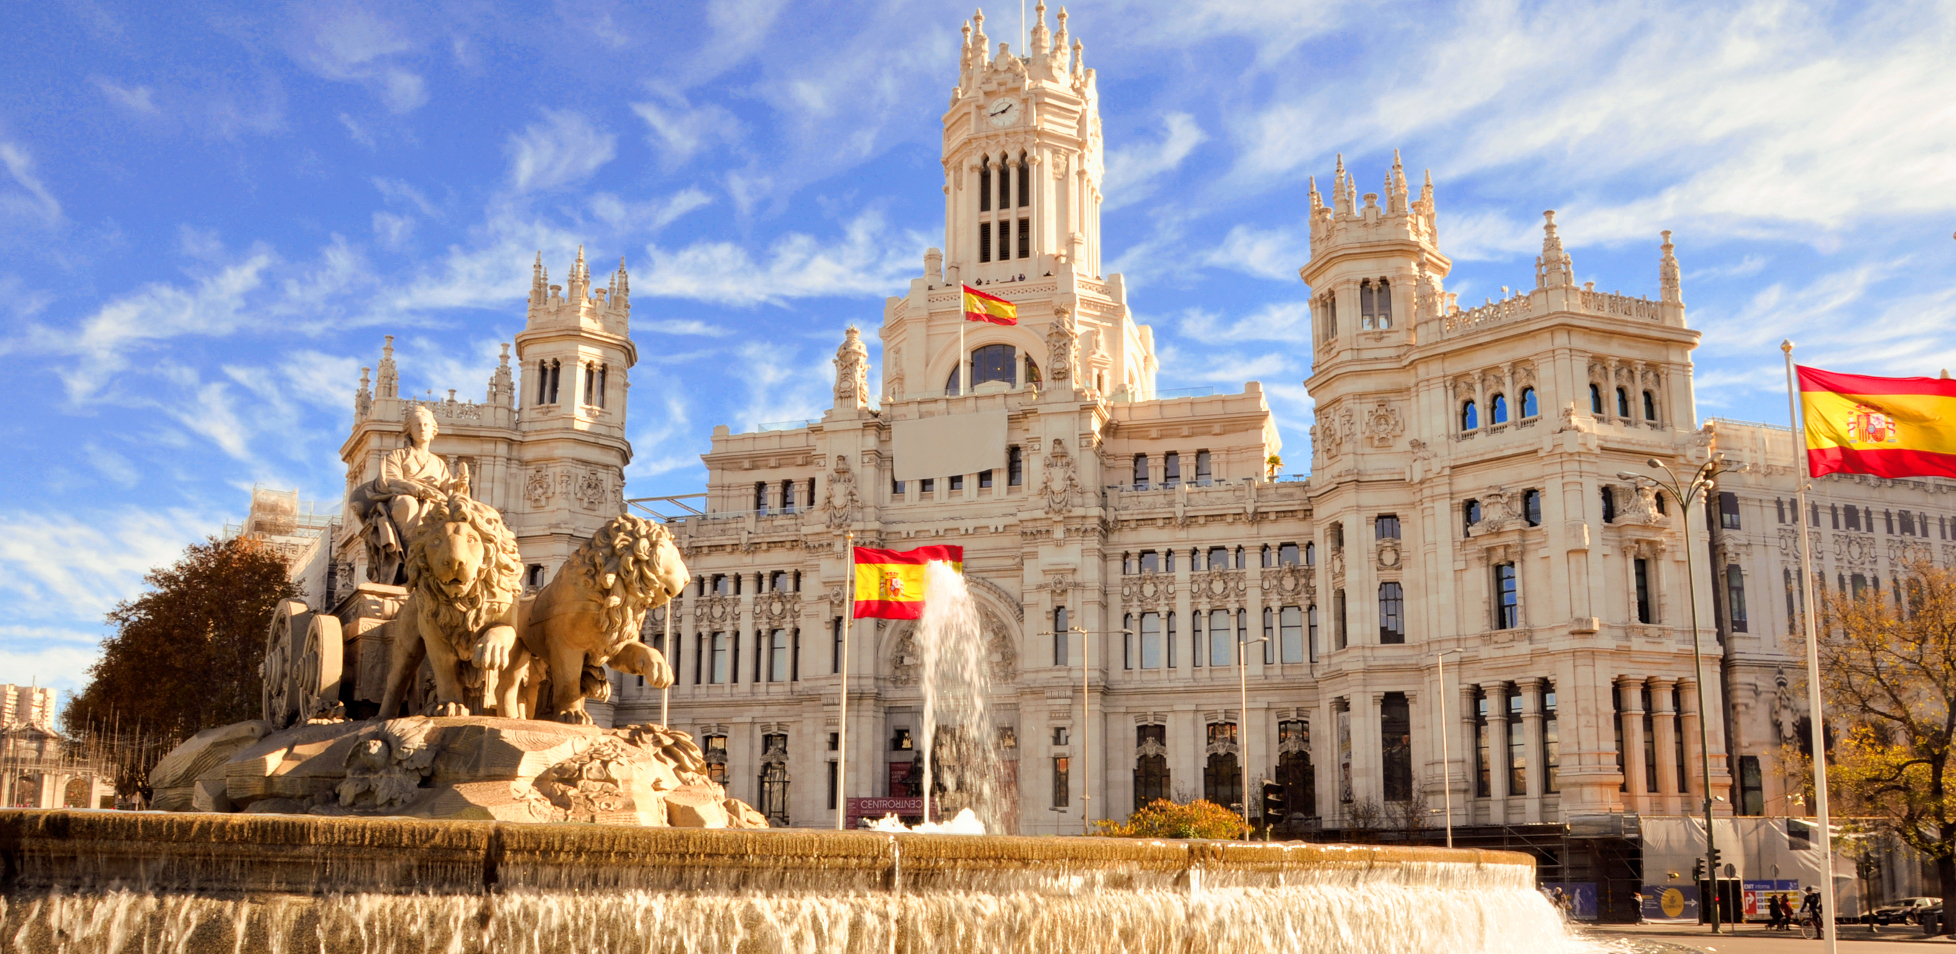 New York to Madrid Spain $318 RT AIrfares on TAP Air Portugal (Travel January - March 2022)